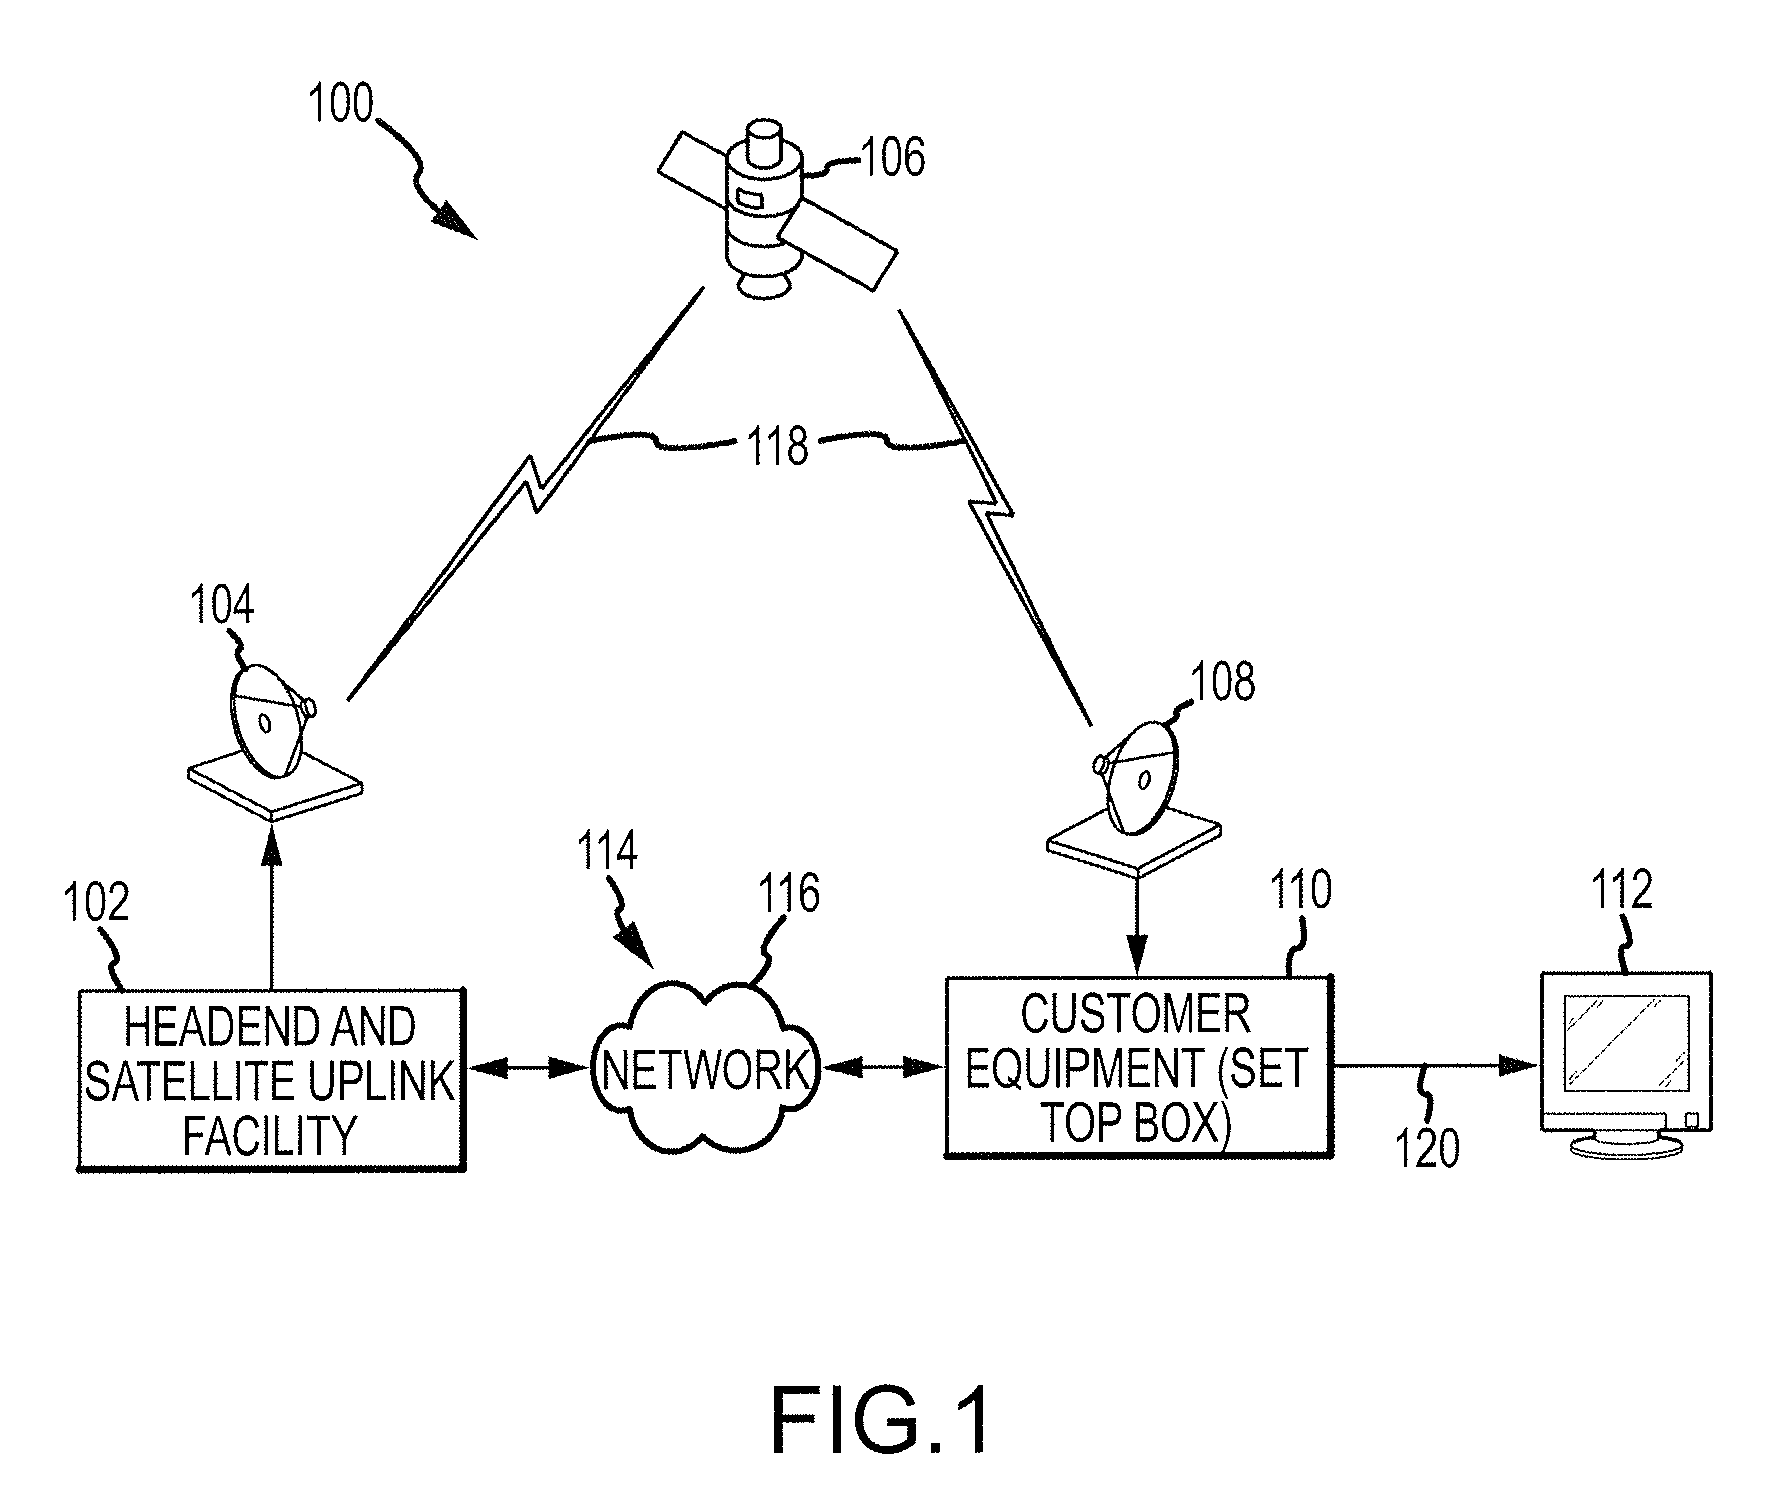 System and method for controlling access to video events associated with video broadcast services